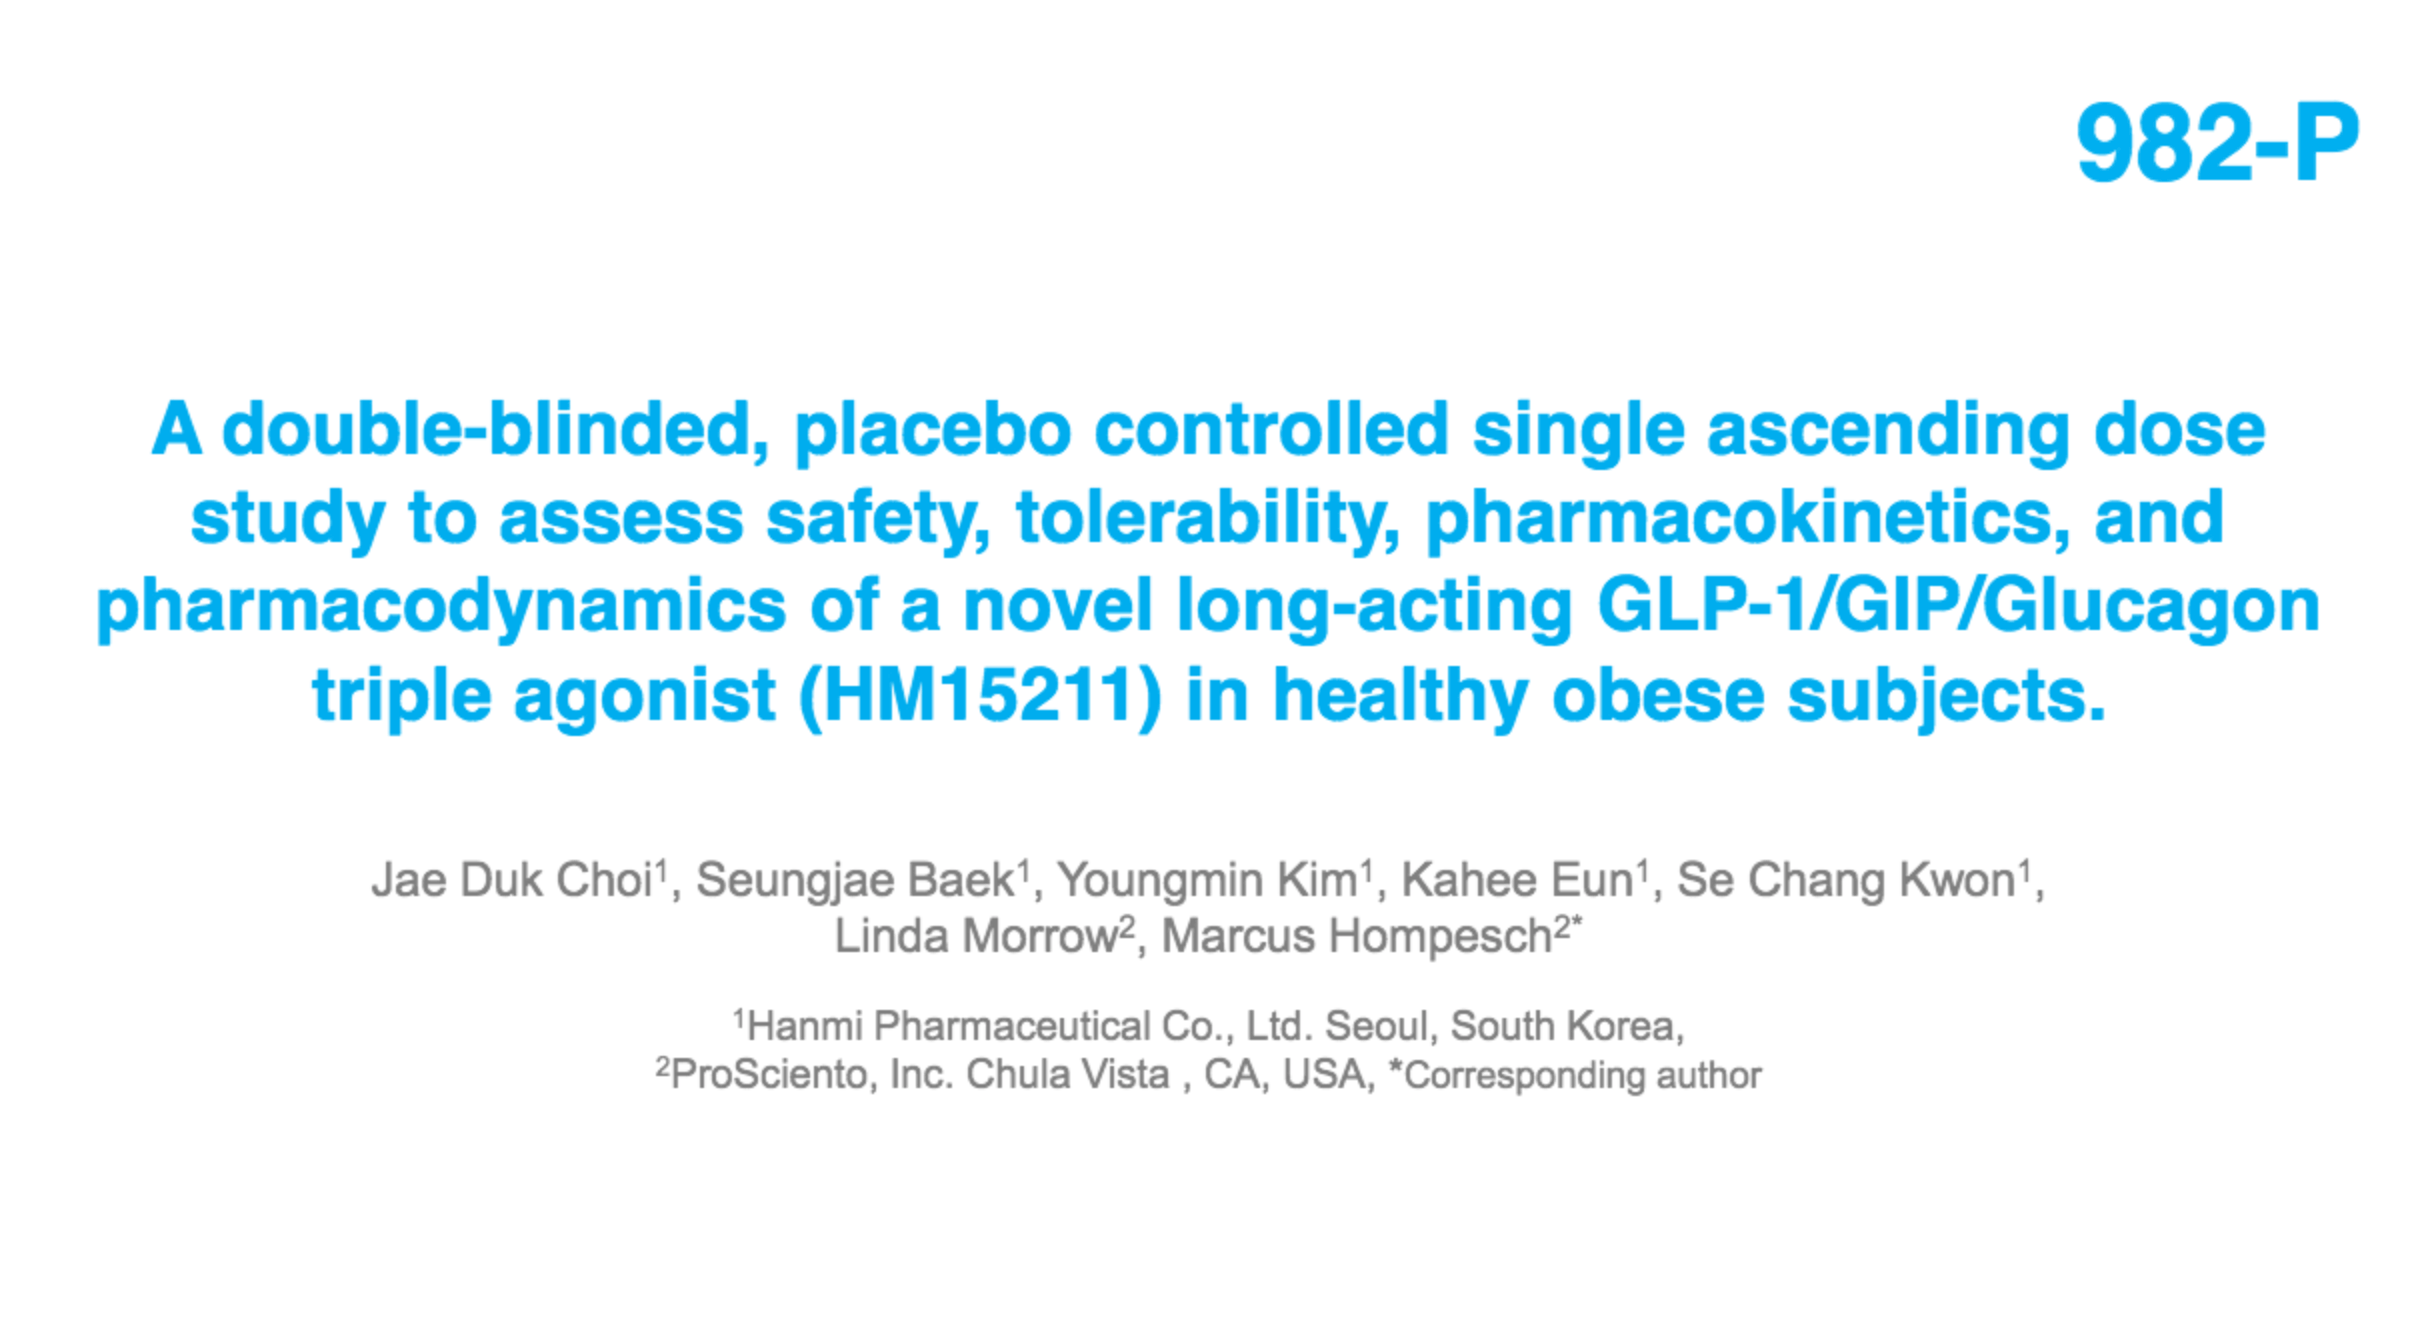 A Double-Blinded, Placebo Controlled, Single Ascending Dose Study for Safety, Tolerability, Pharmacokinetics, and Pharmacodynamics after Subcutaneous Administration of Novel Long-Acting GLP-1/GIP/Glucagon Triple Agonist (HM15211) in Healthy Obese thumbnail